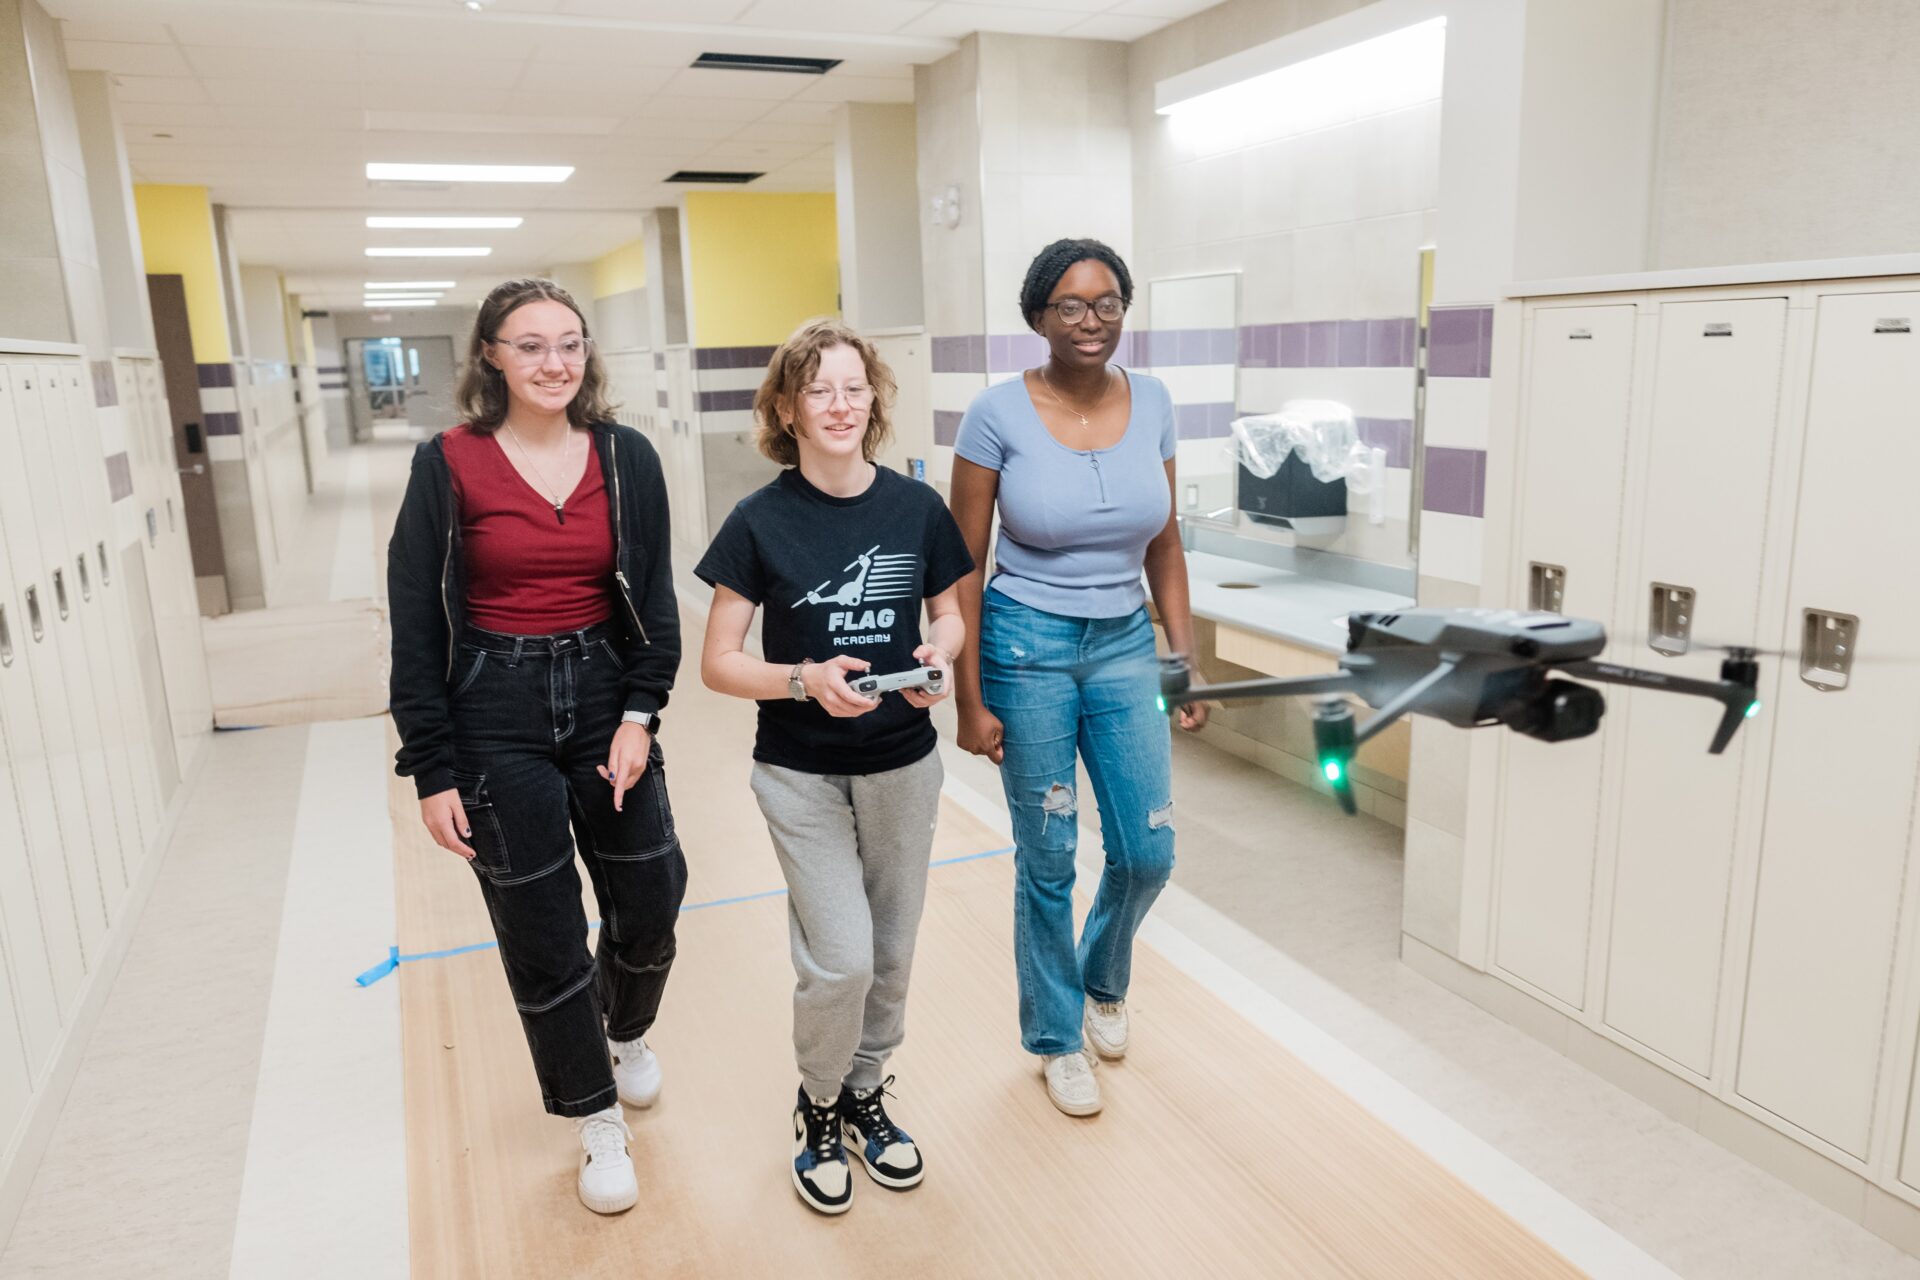 Three young women pilot a drone in a school hallway.